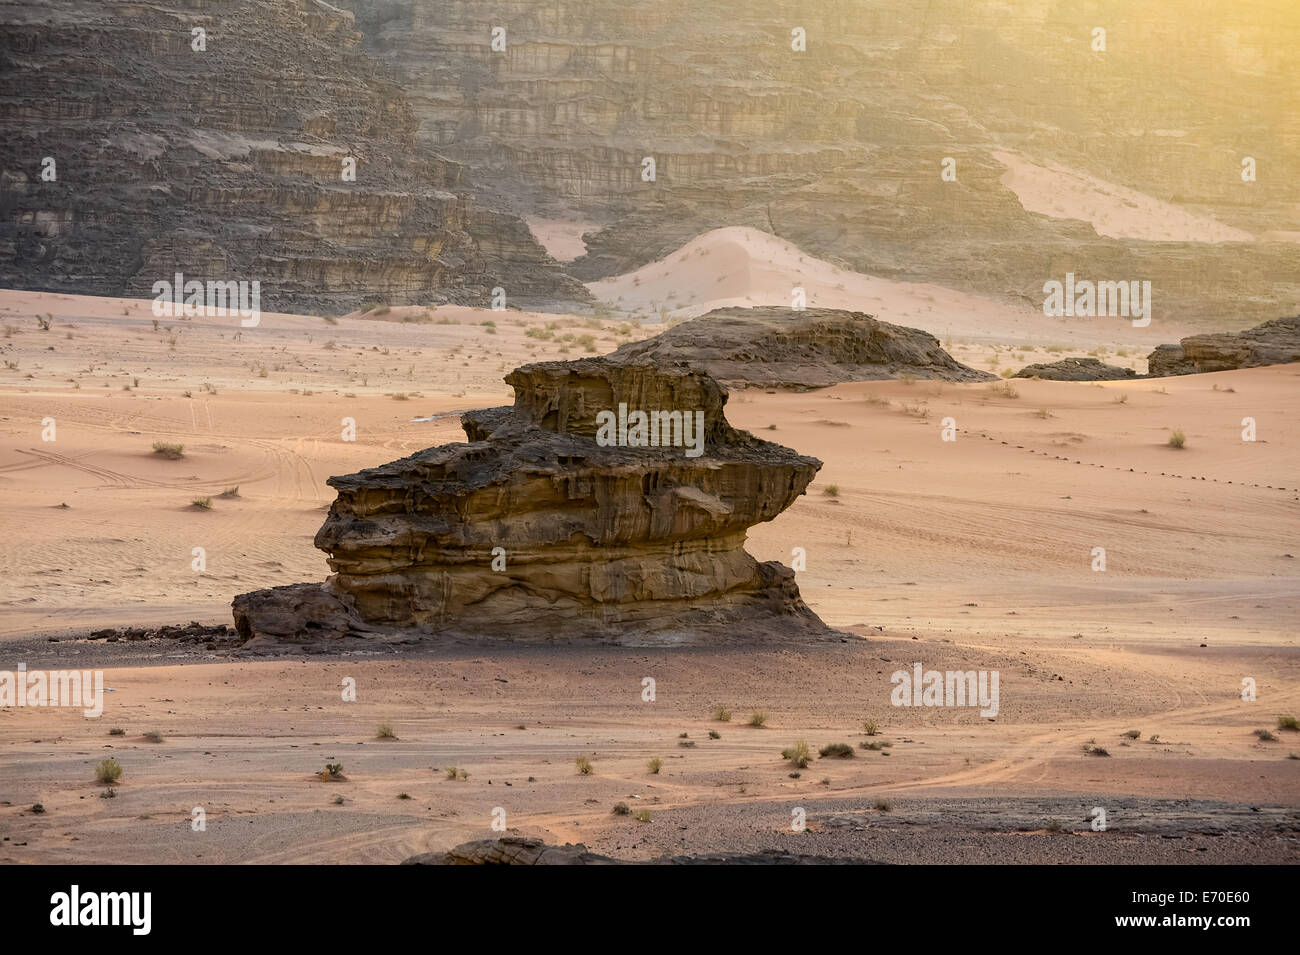 Jordan. Wadi Rum is also known as The Valley of the Moon. Sunsets are spectacular in the desert. Stock Photo